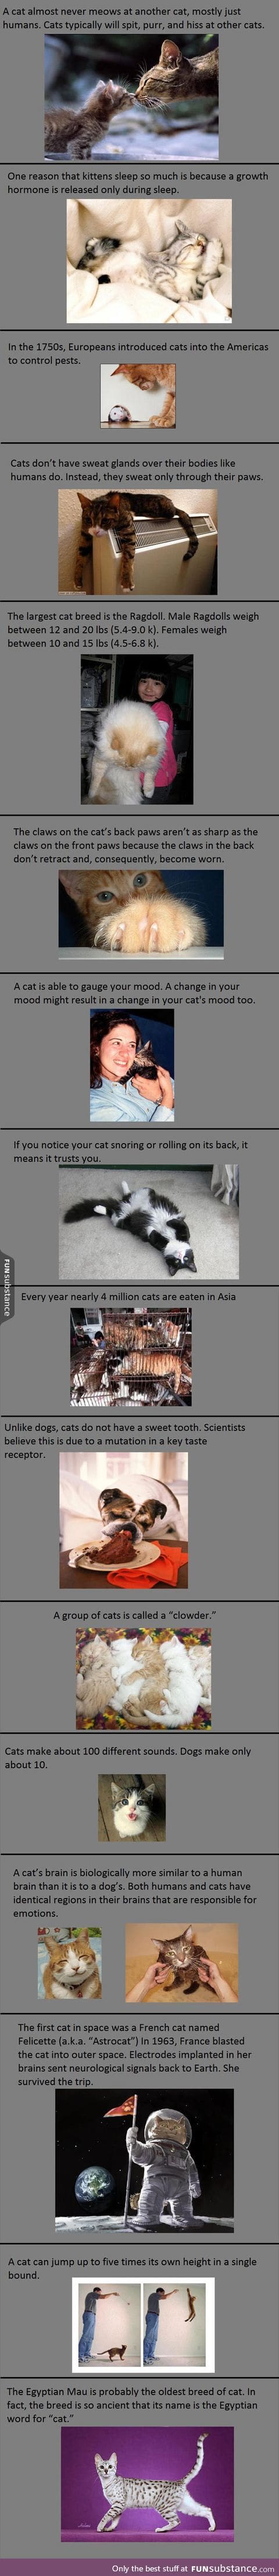 Interesting Cat Facts You Probably Don't Know